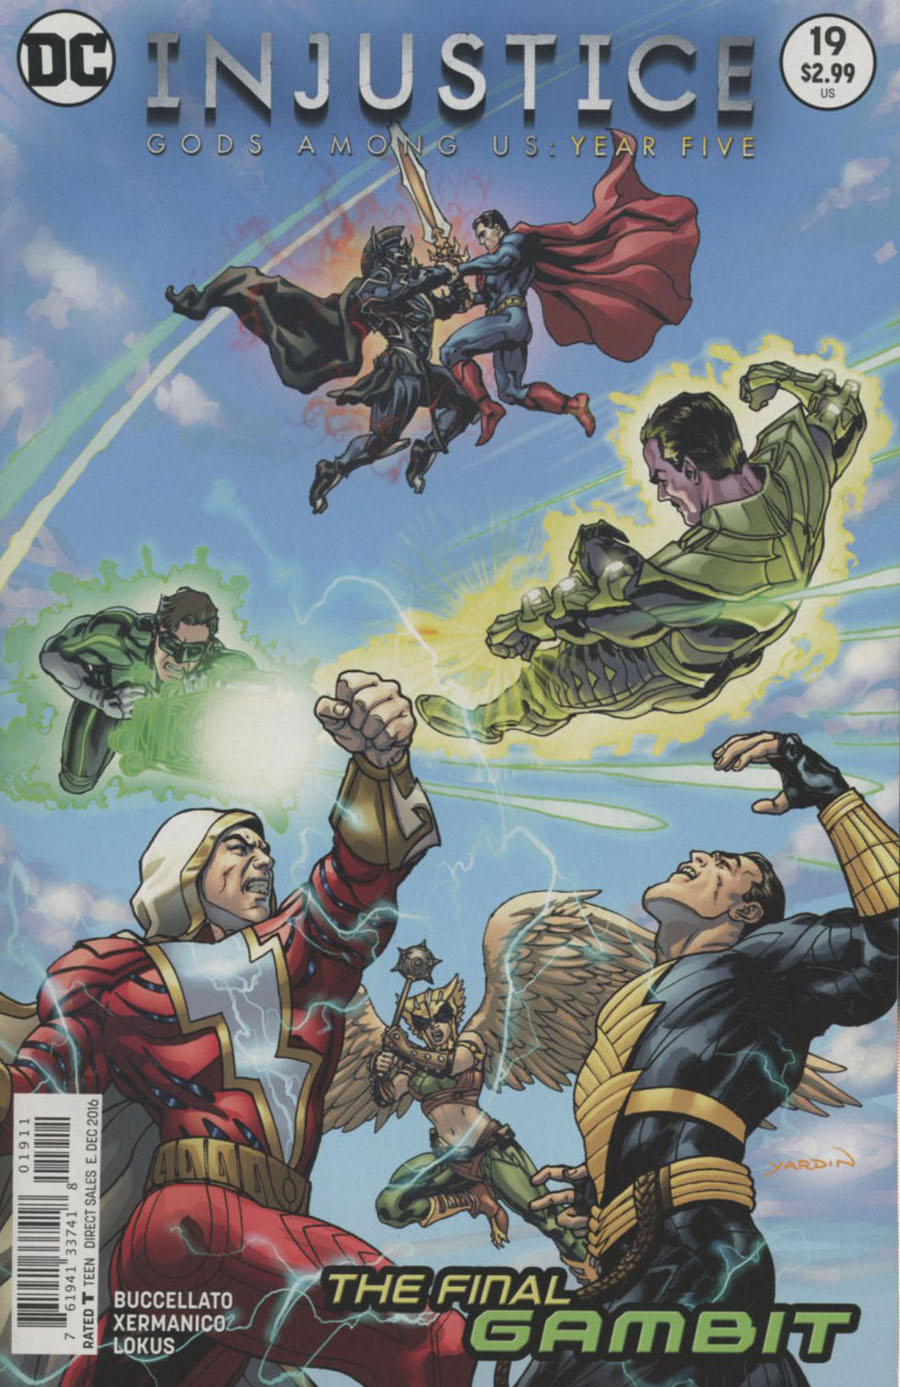 Injustice Gods Among Us Year Five #19